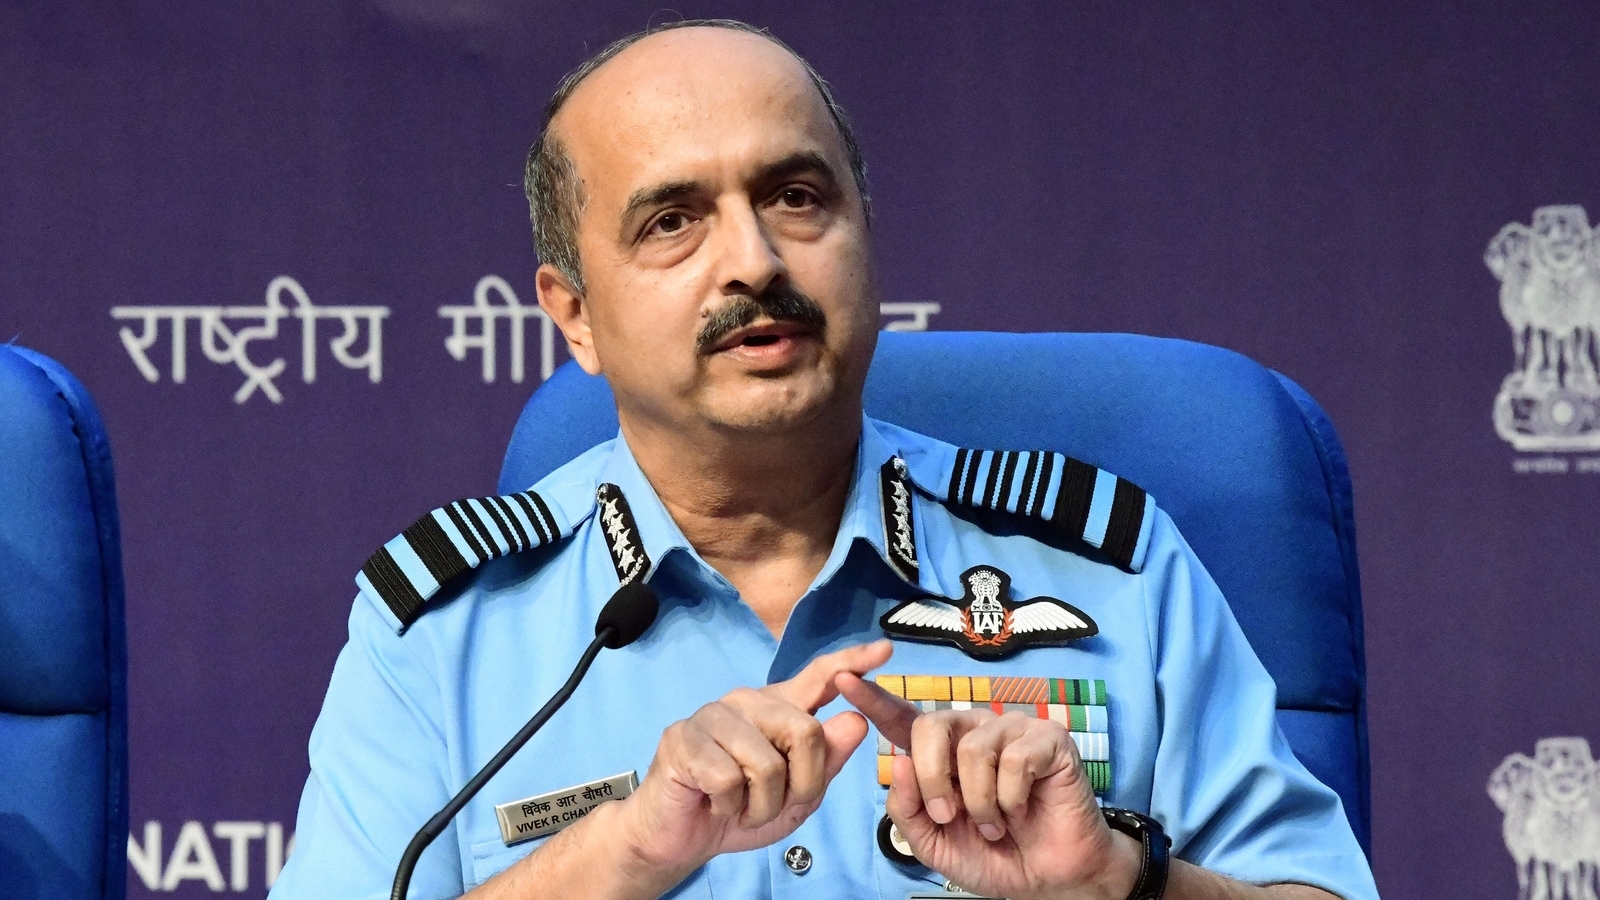 Read more about the article Agnipath stir: IAF chief says violence no solution, asks youth to seek clarity | Latest News India